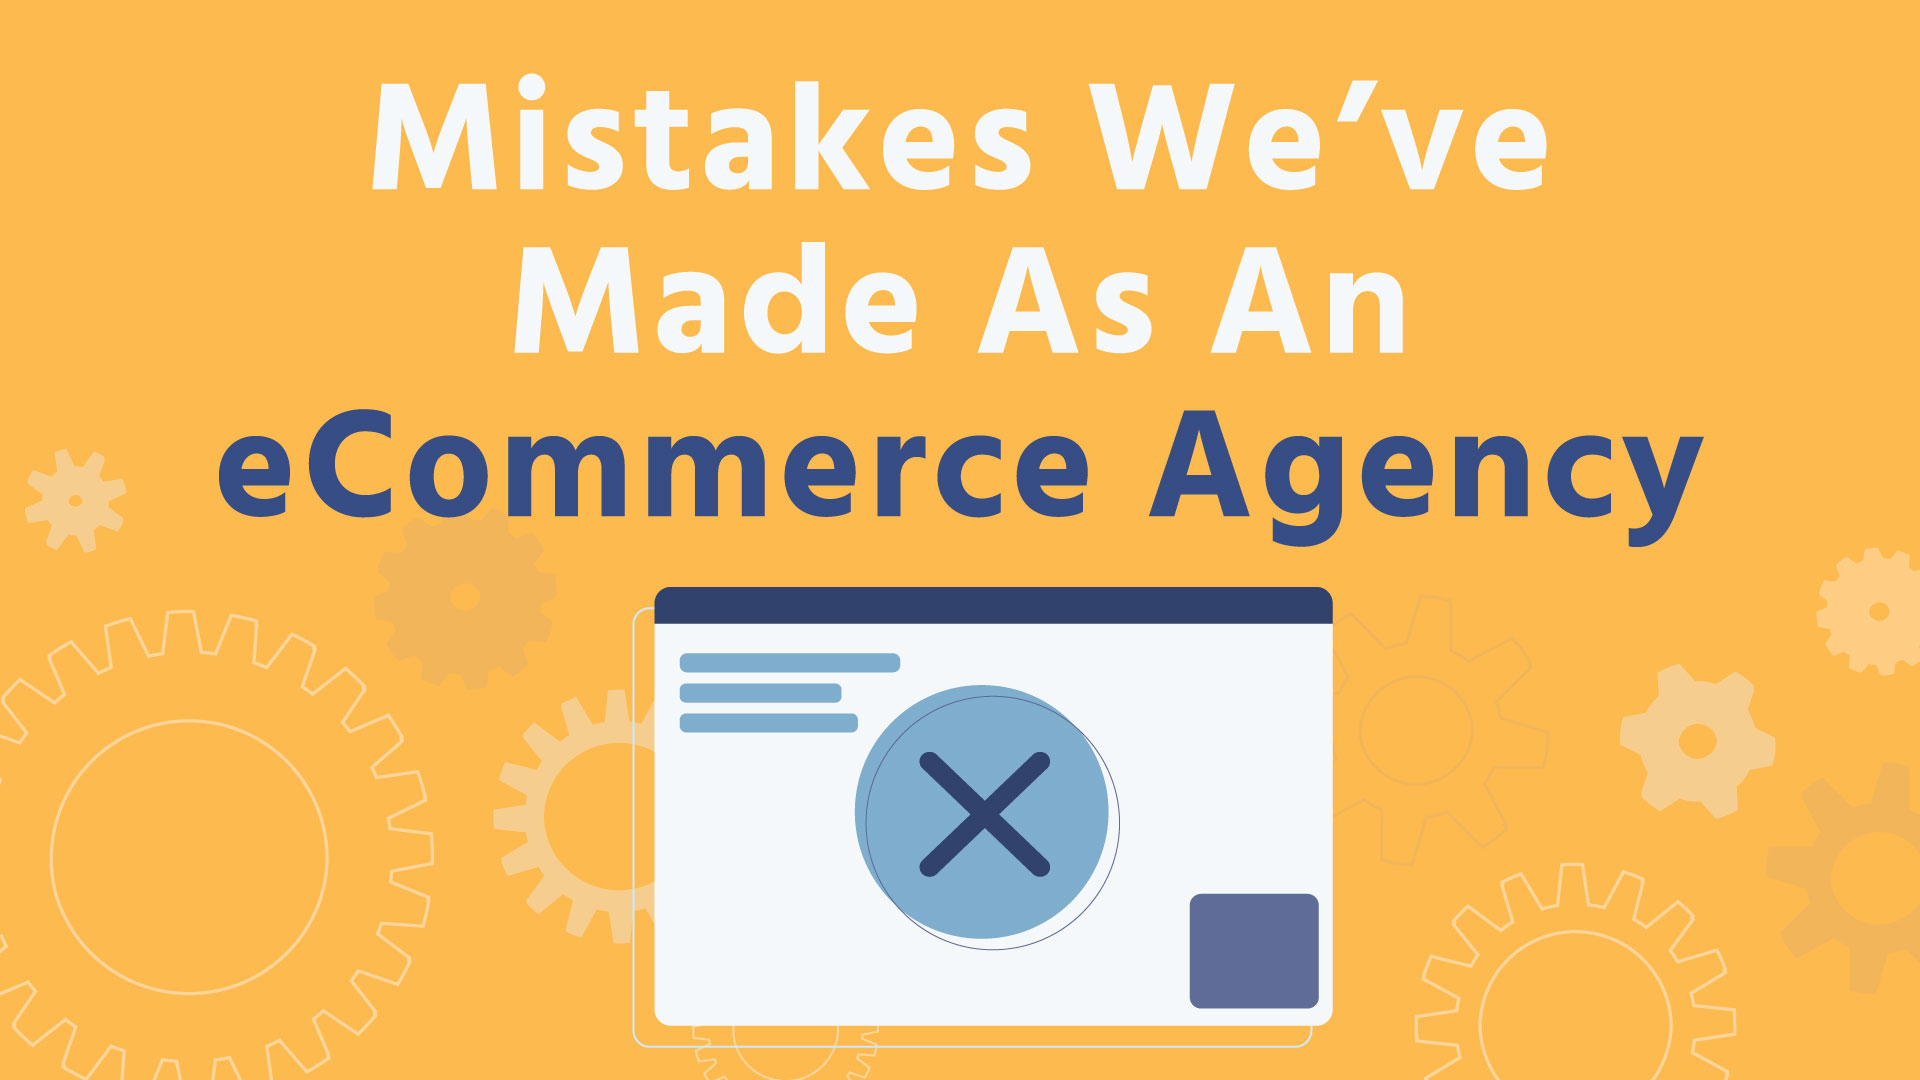 Mistakes We’ve Made As An eCommerce Agency